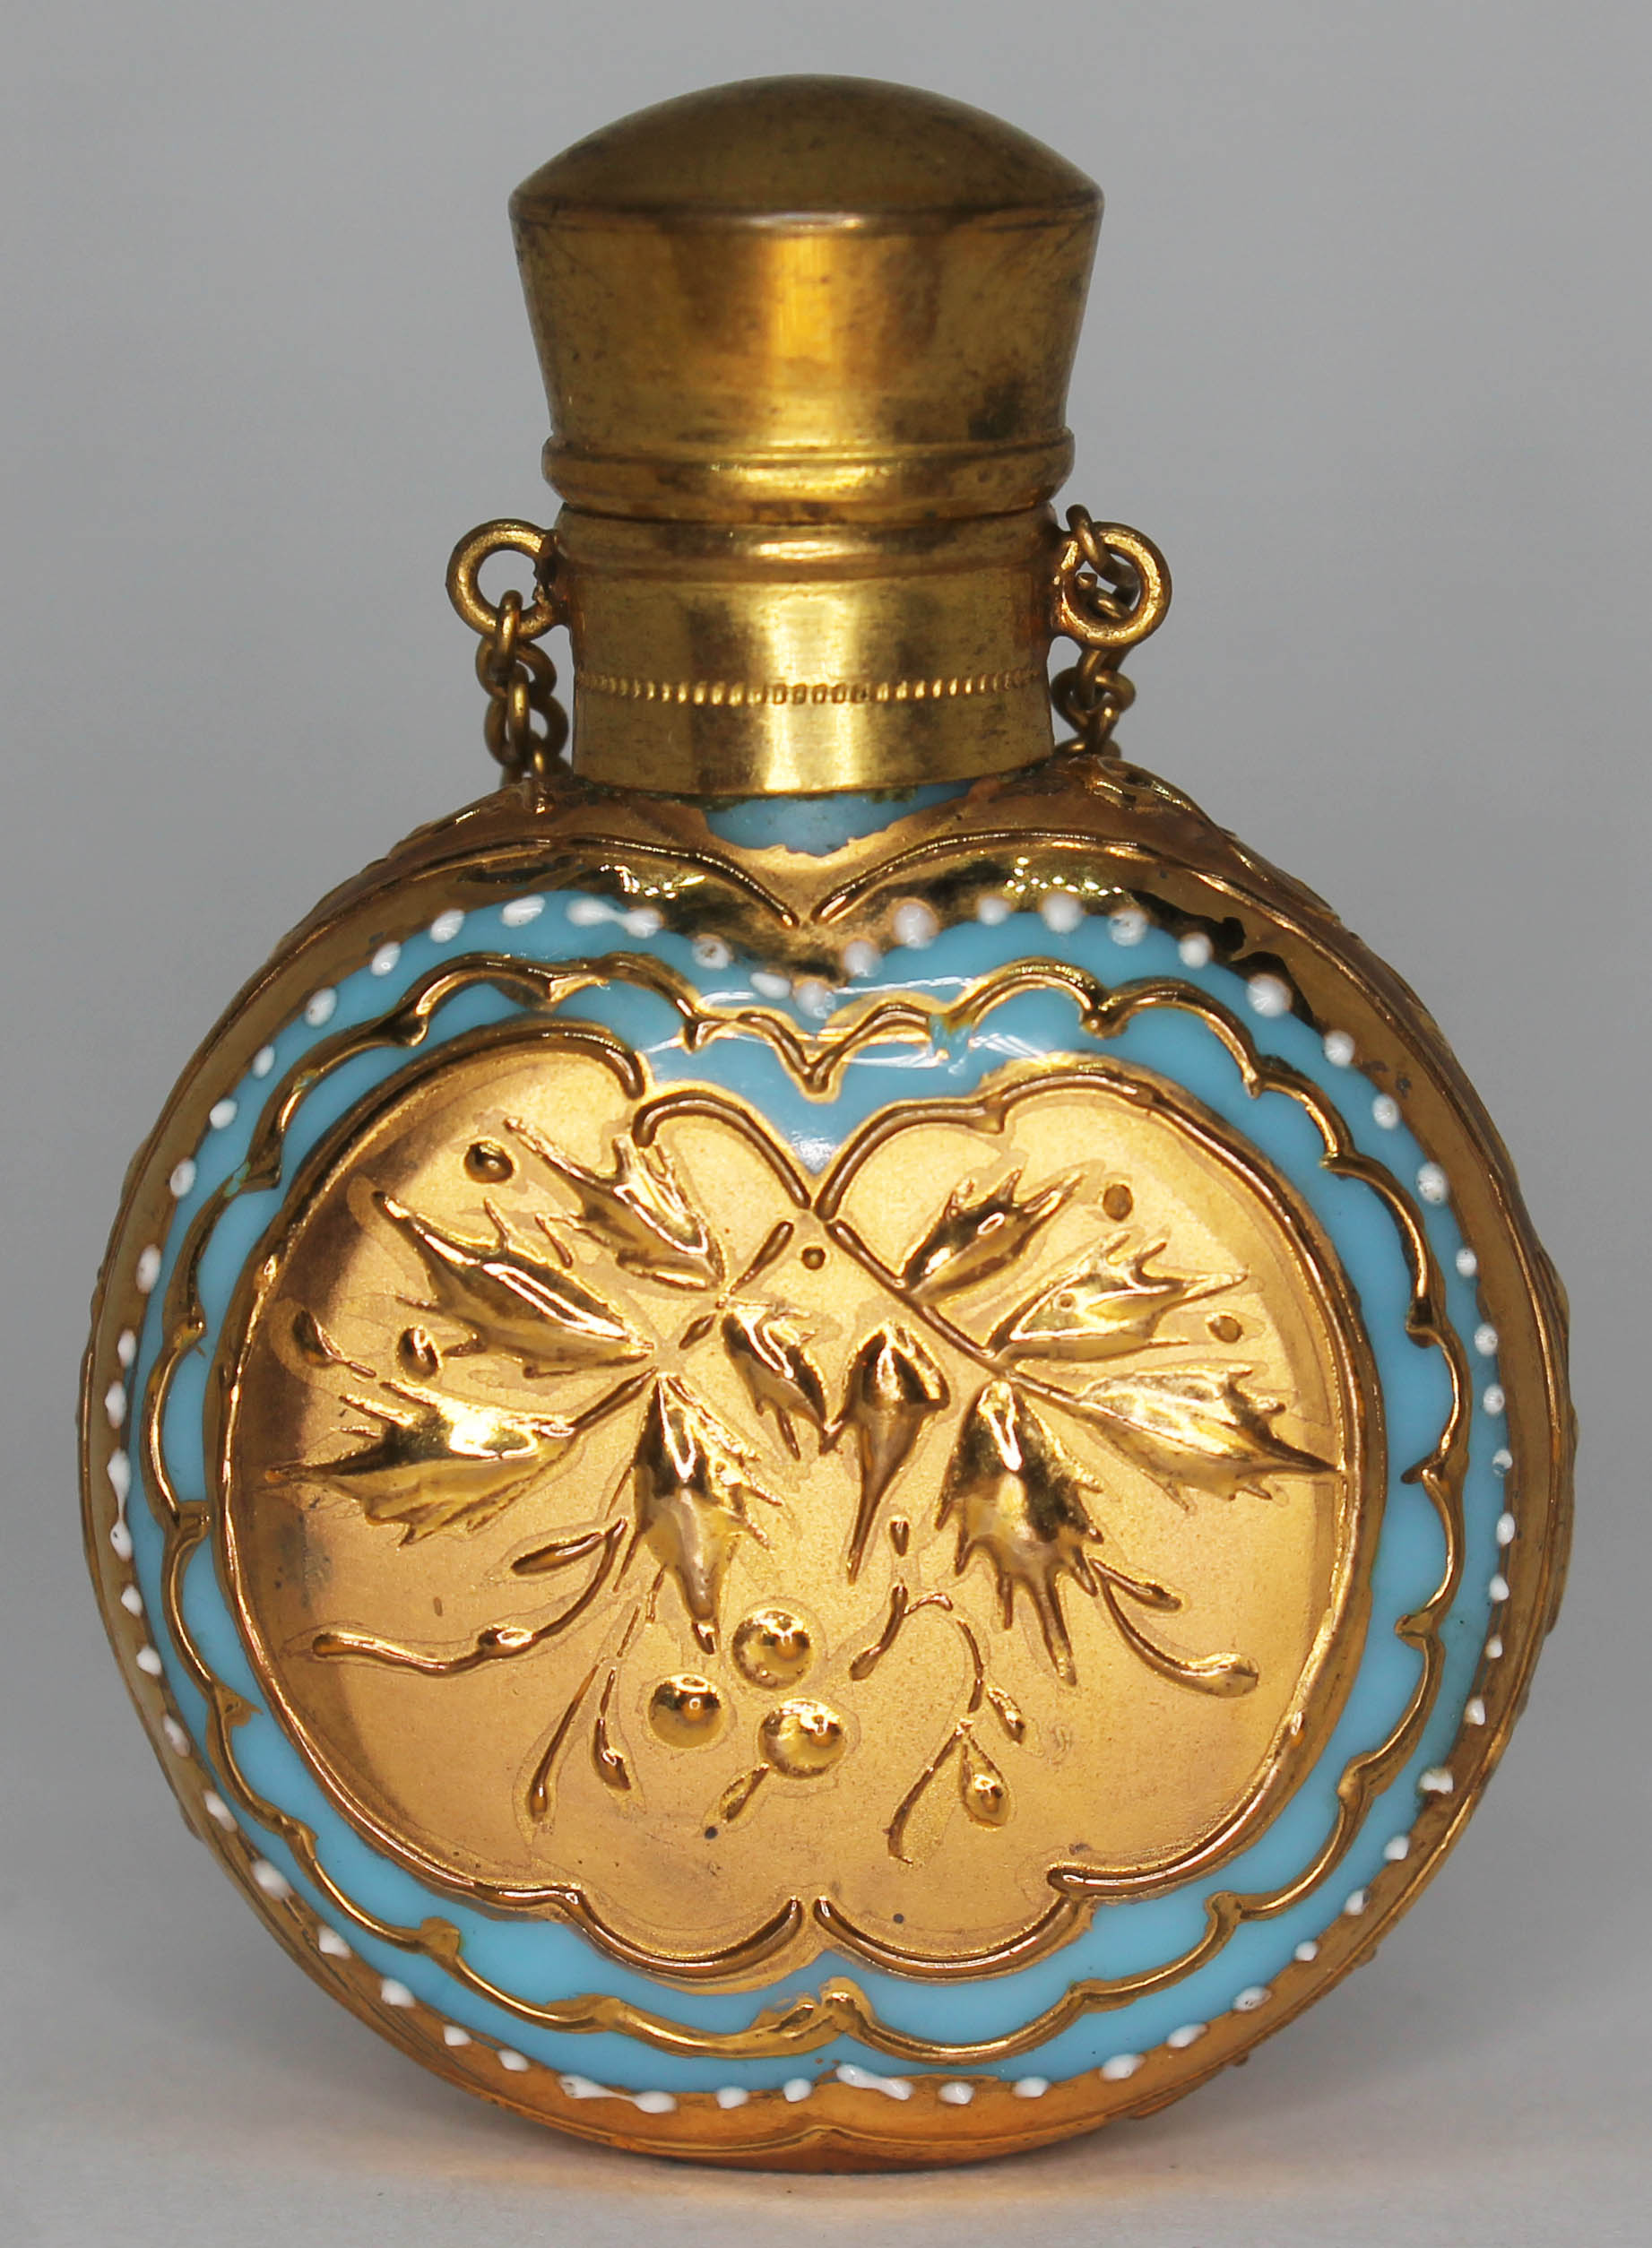 A continental gilt and enamelled glass scent bottle, length 55mm. Condition - part of glass